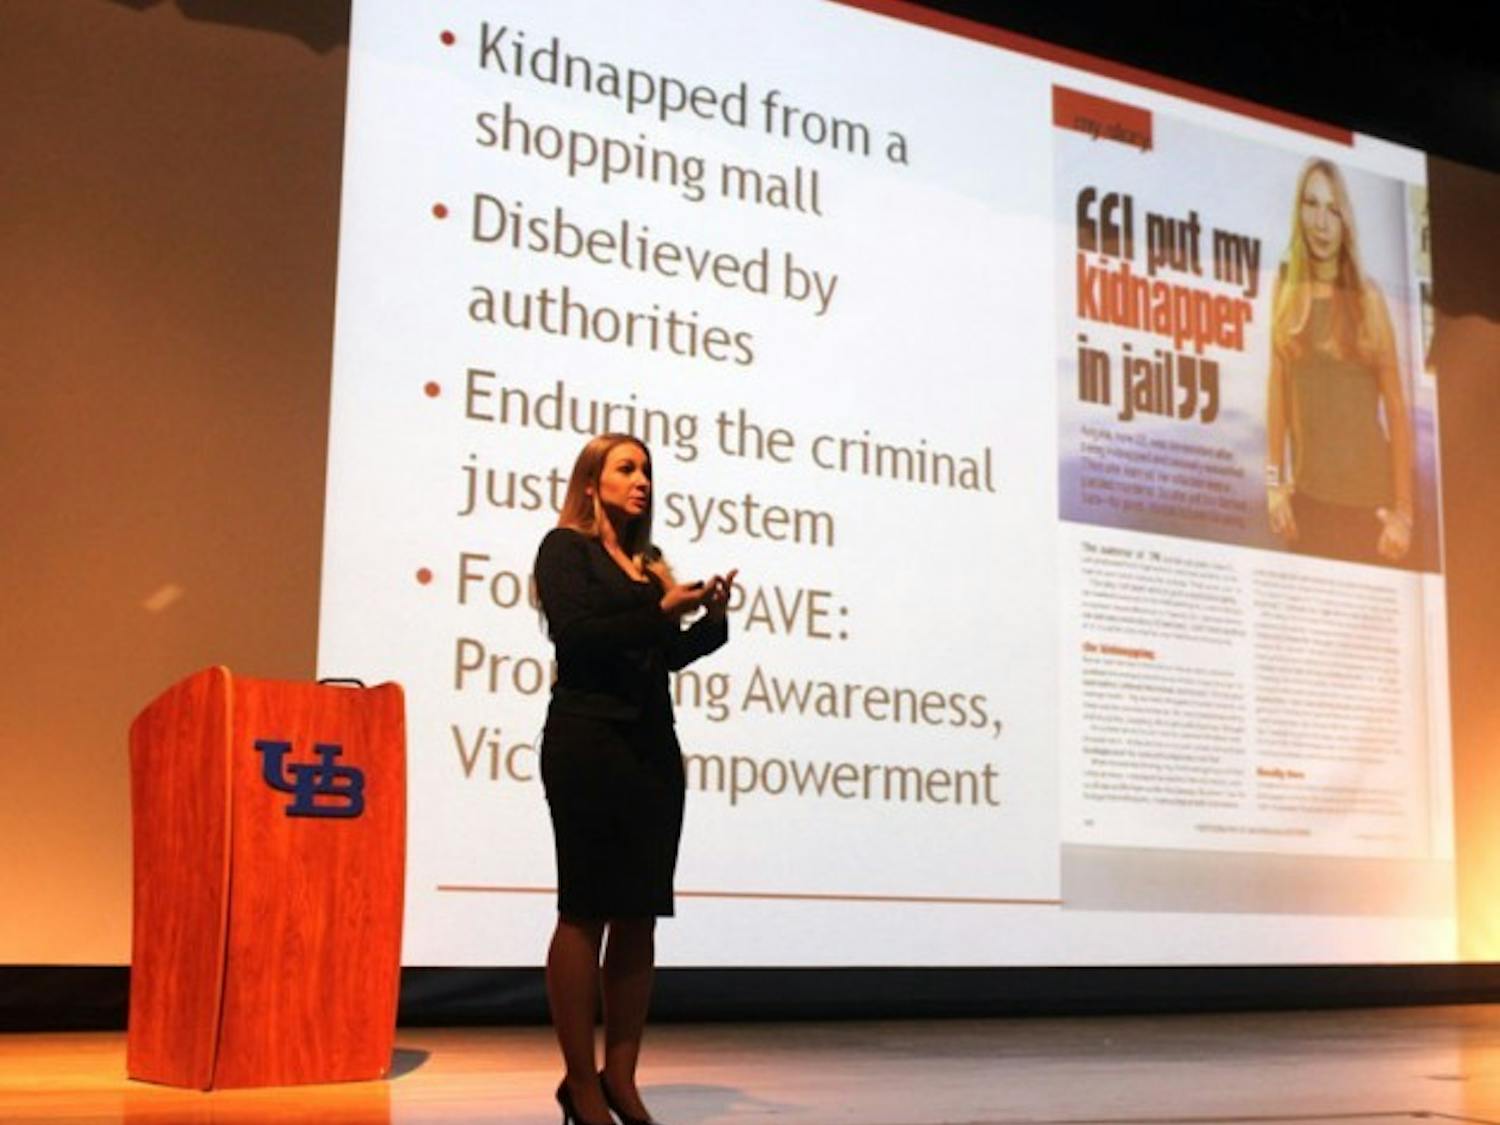 During the 26th annual Take Back the Night at UB, Angel Rose, a sexual assault survivor and founder and executive director of Promoting Awareness, Victim Empowerment (PAVE), shared her personal story and educated college students on how they can combat the issue on their own campuses.&nbsp;Cletus Emokpae, The Spectrum